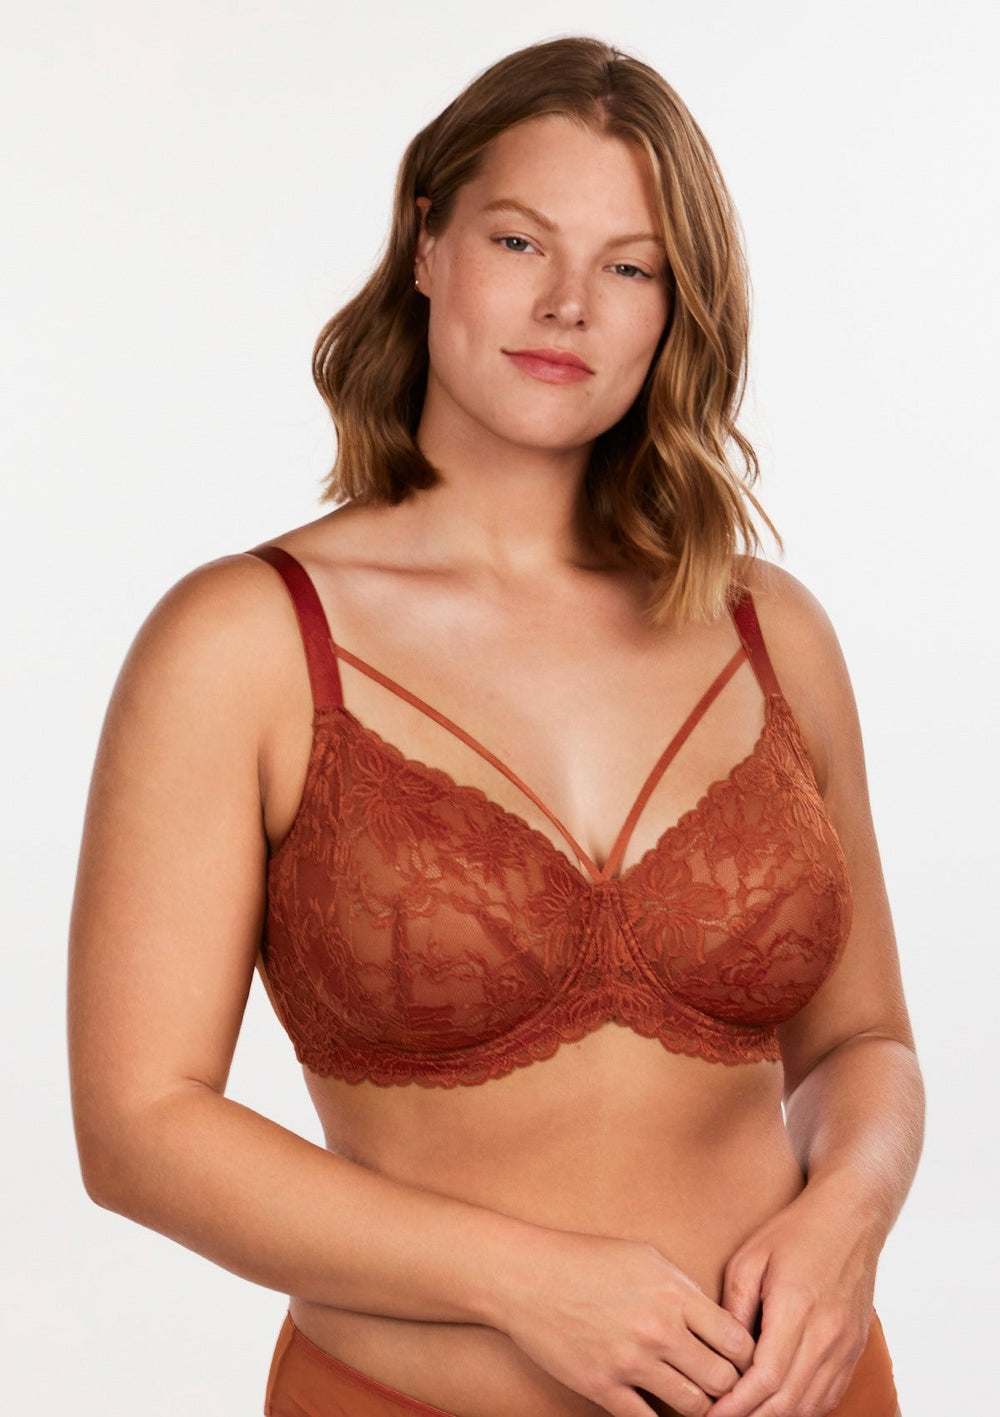 Unlined Bra with Luccia Bra by Idonim Lingerie : r/sewing